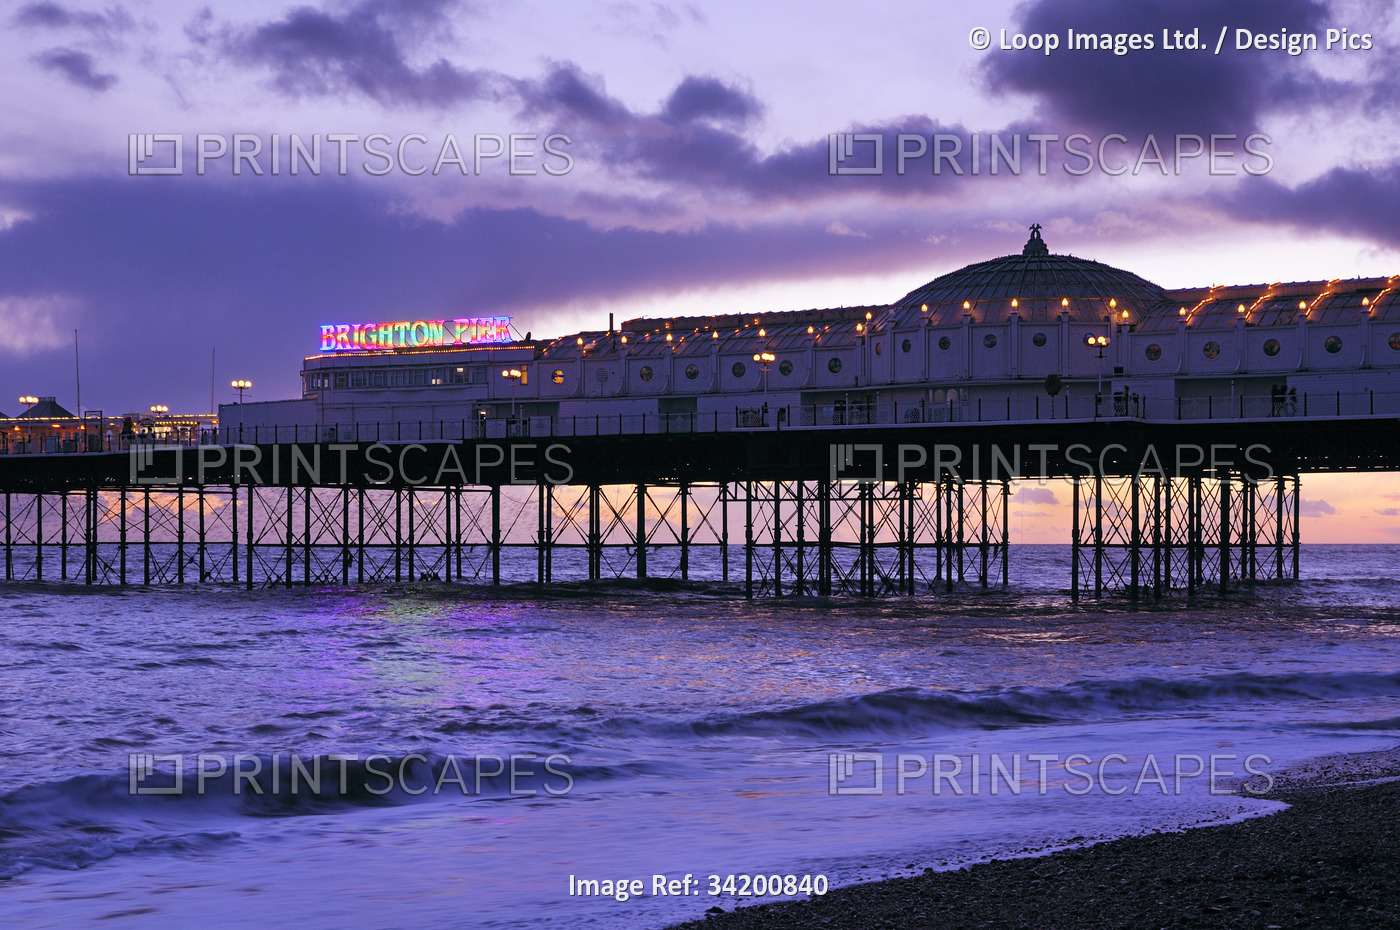 Brighton Palace Pier seen at sunset as dusk begins to fall.